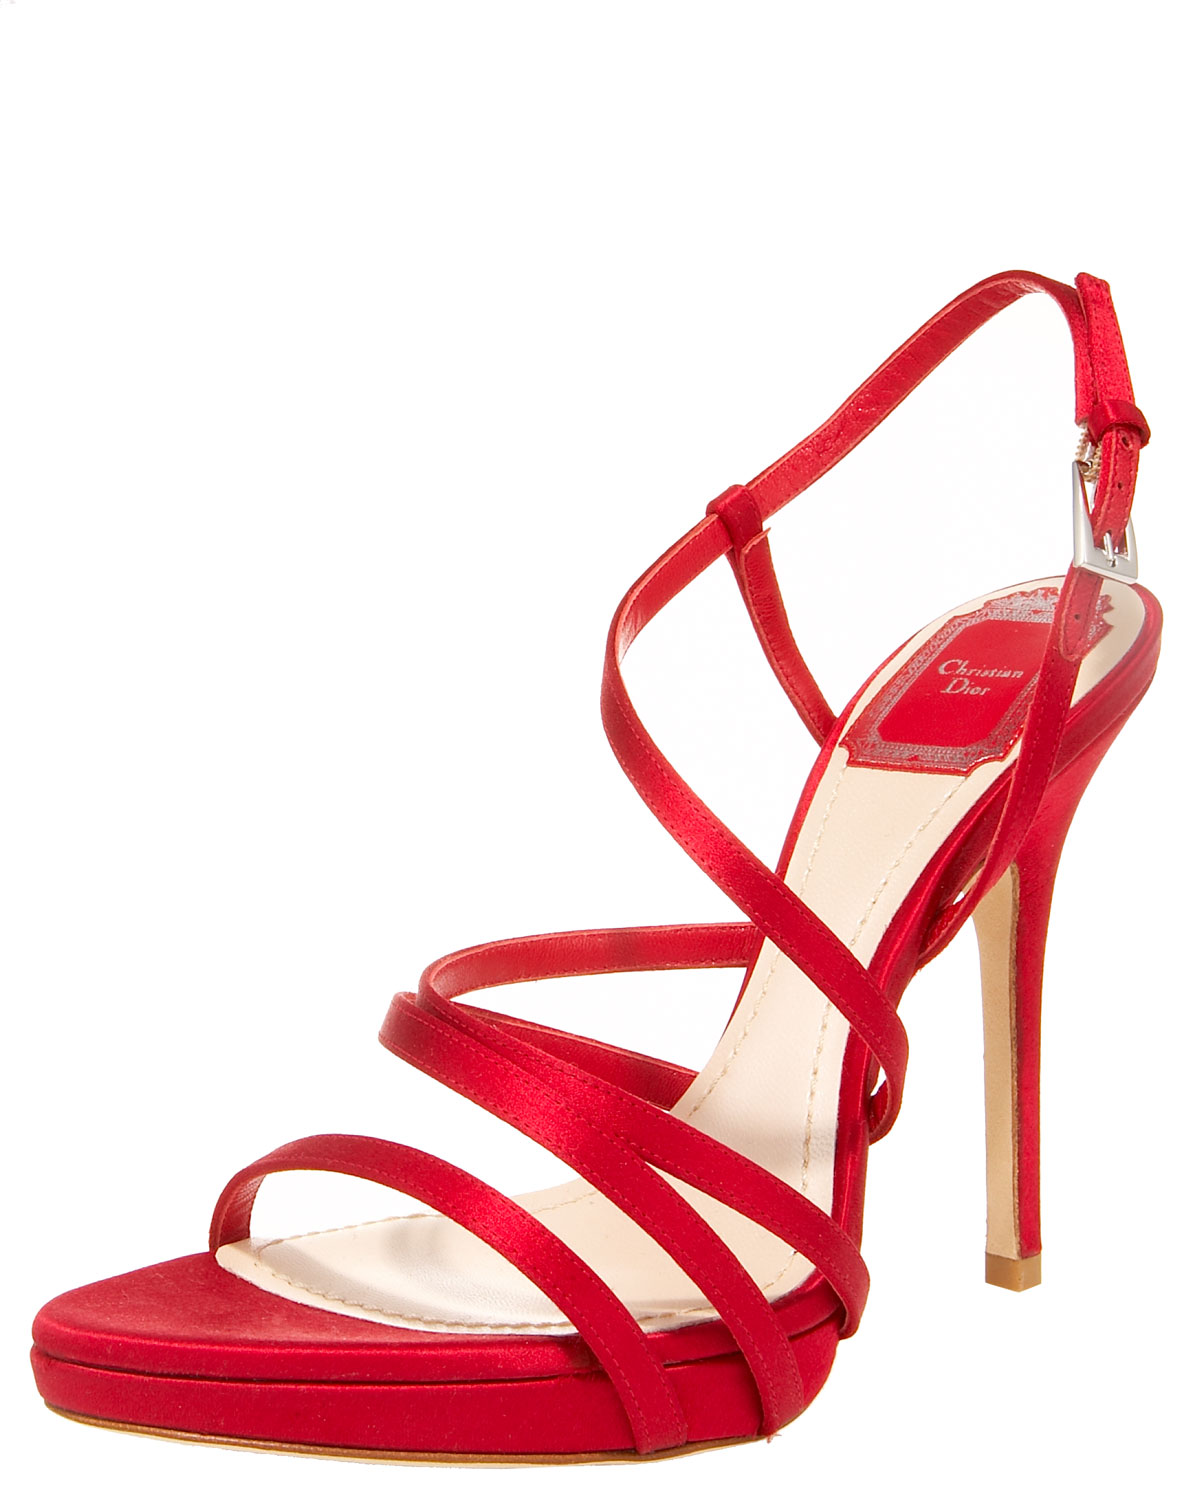 Dior Strappy Satin Sandal in Red | Lyst